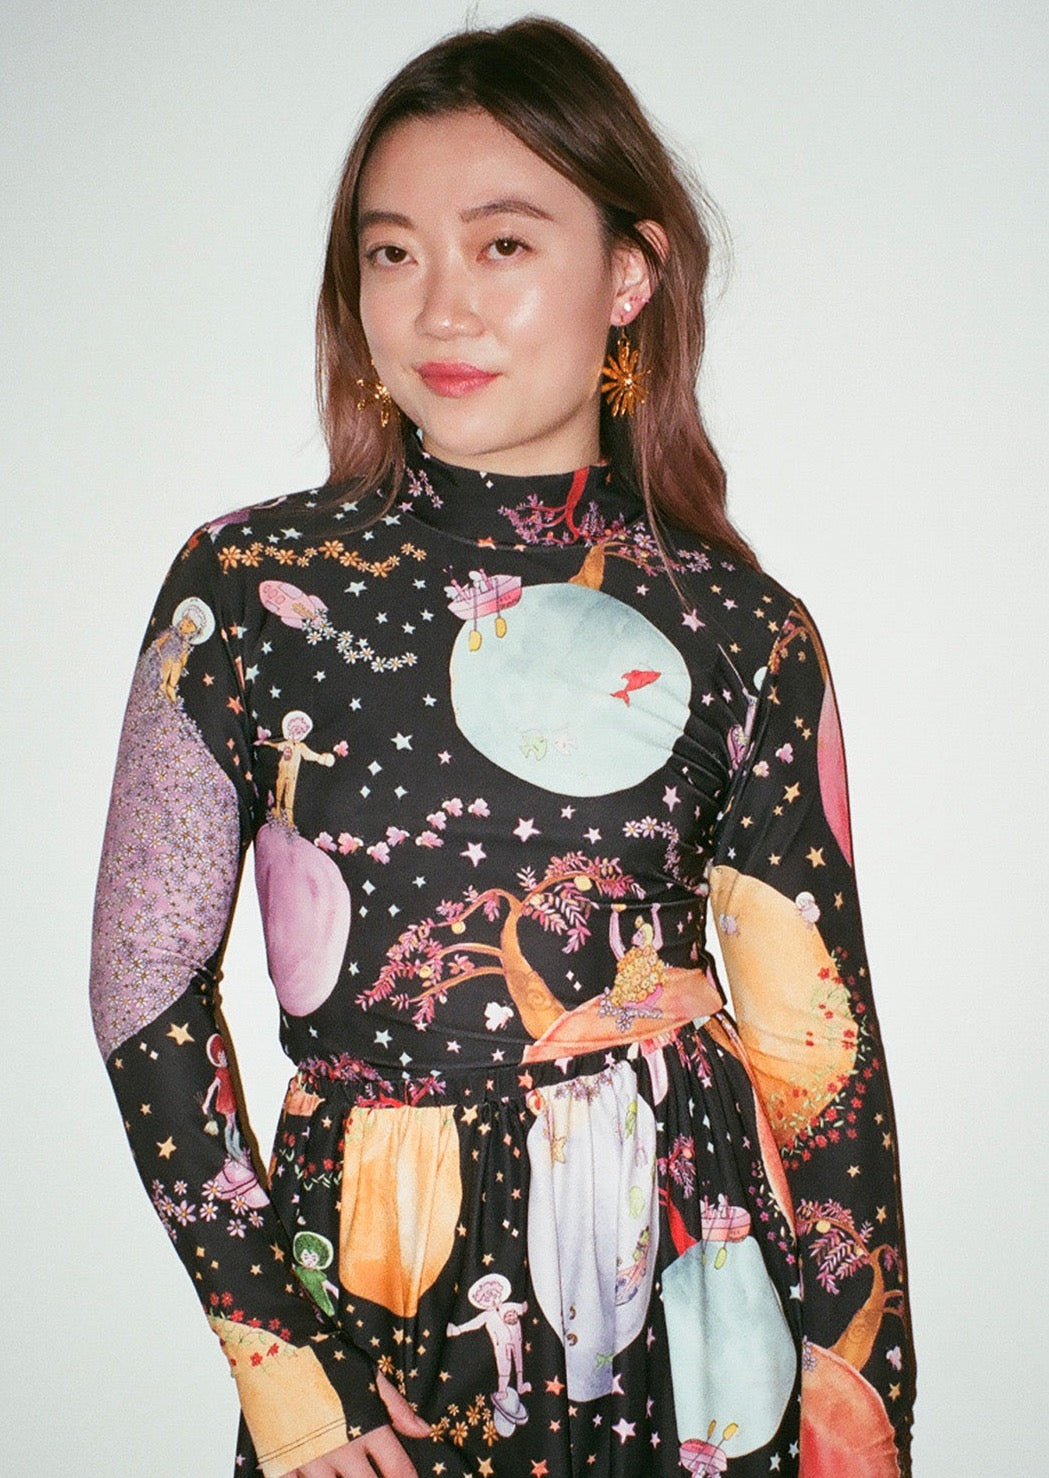 Our signature body-hugging turtleneck. Printed in our intergalactically delightful Good Girls go to Mars print, a multi-planet celebration of joy in the high skies.